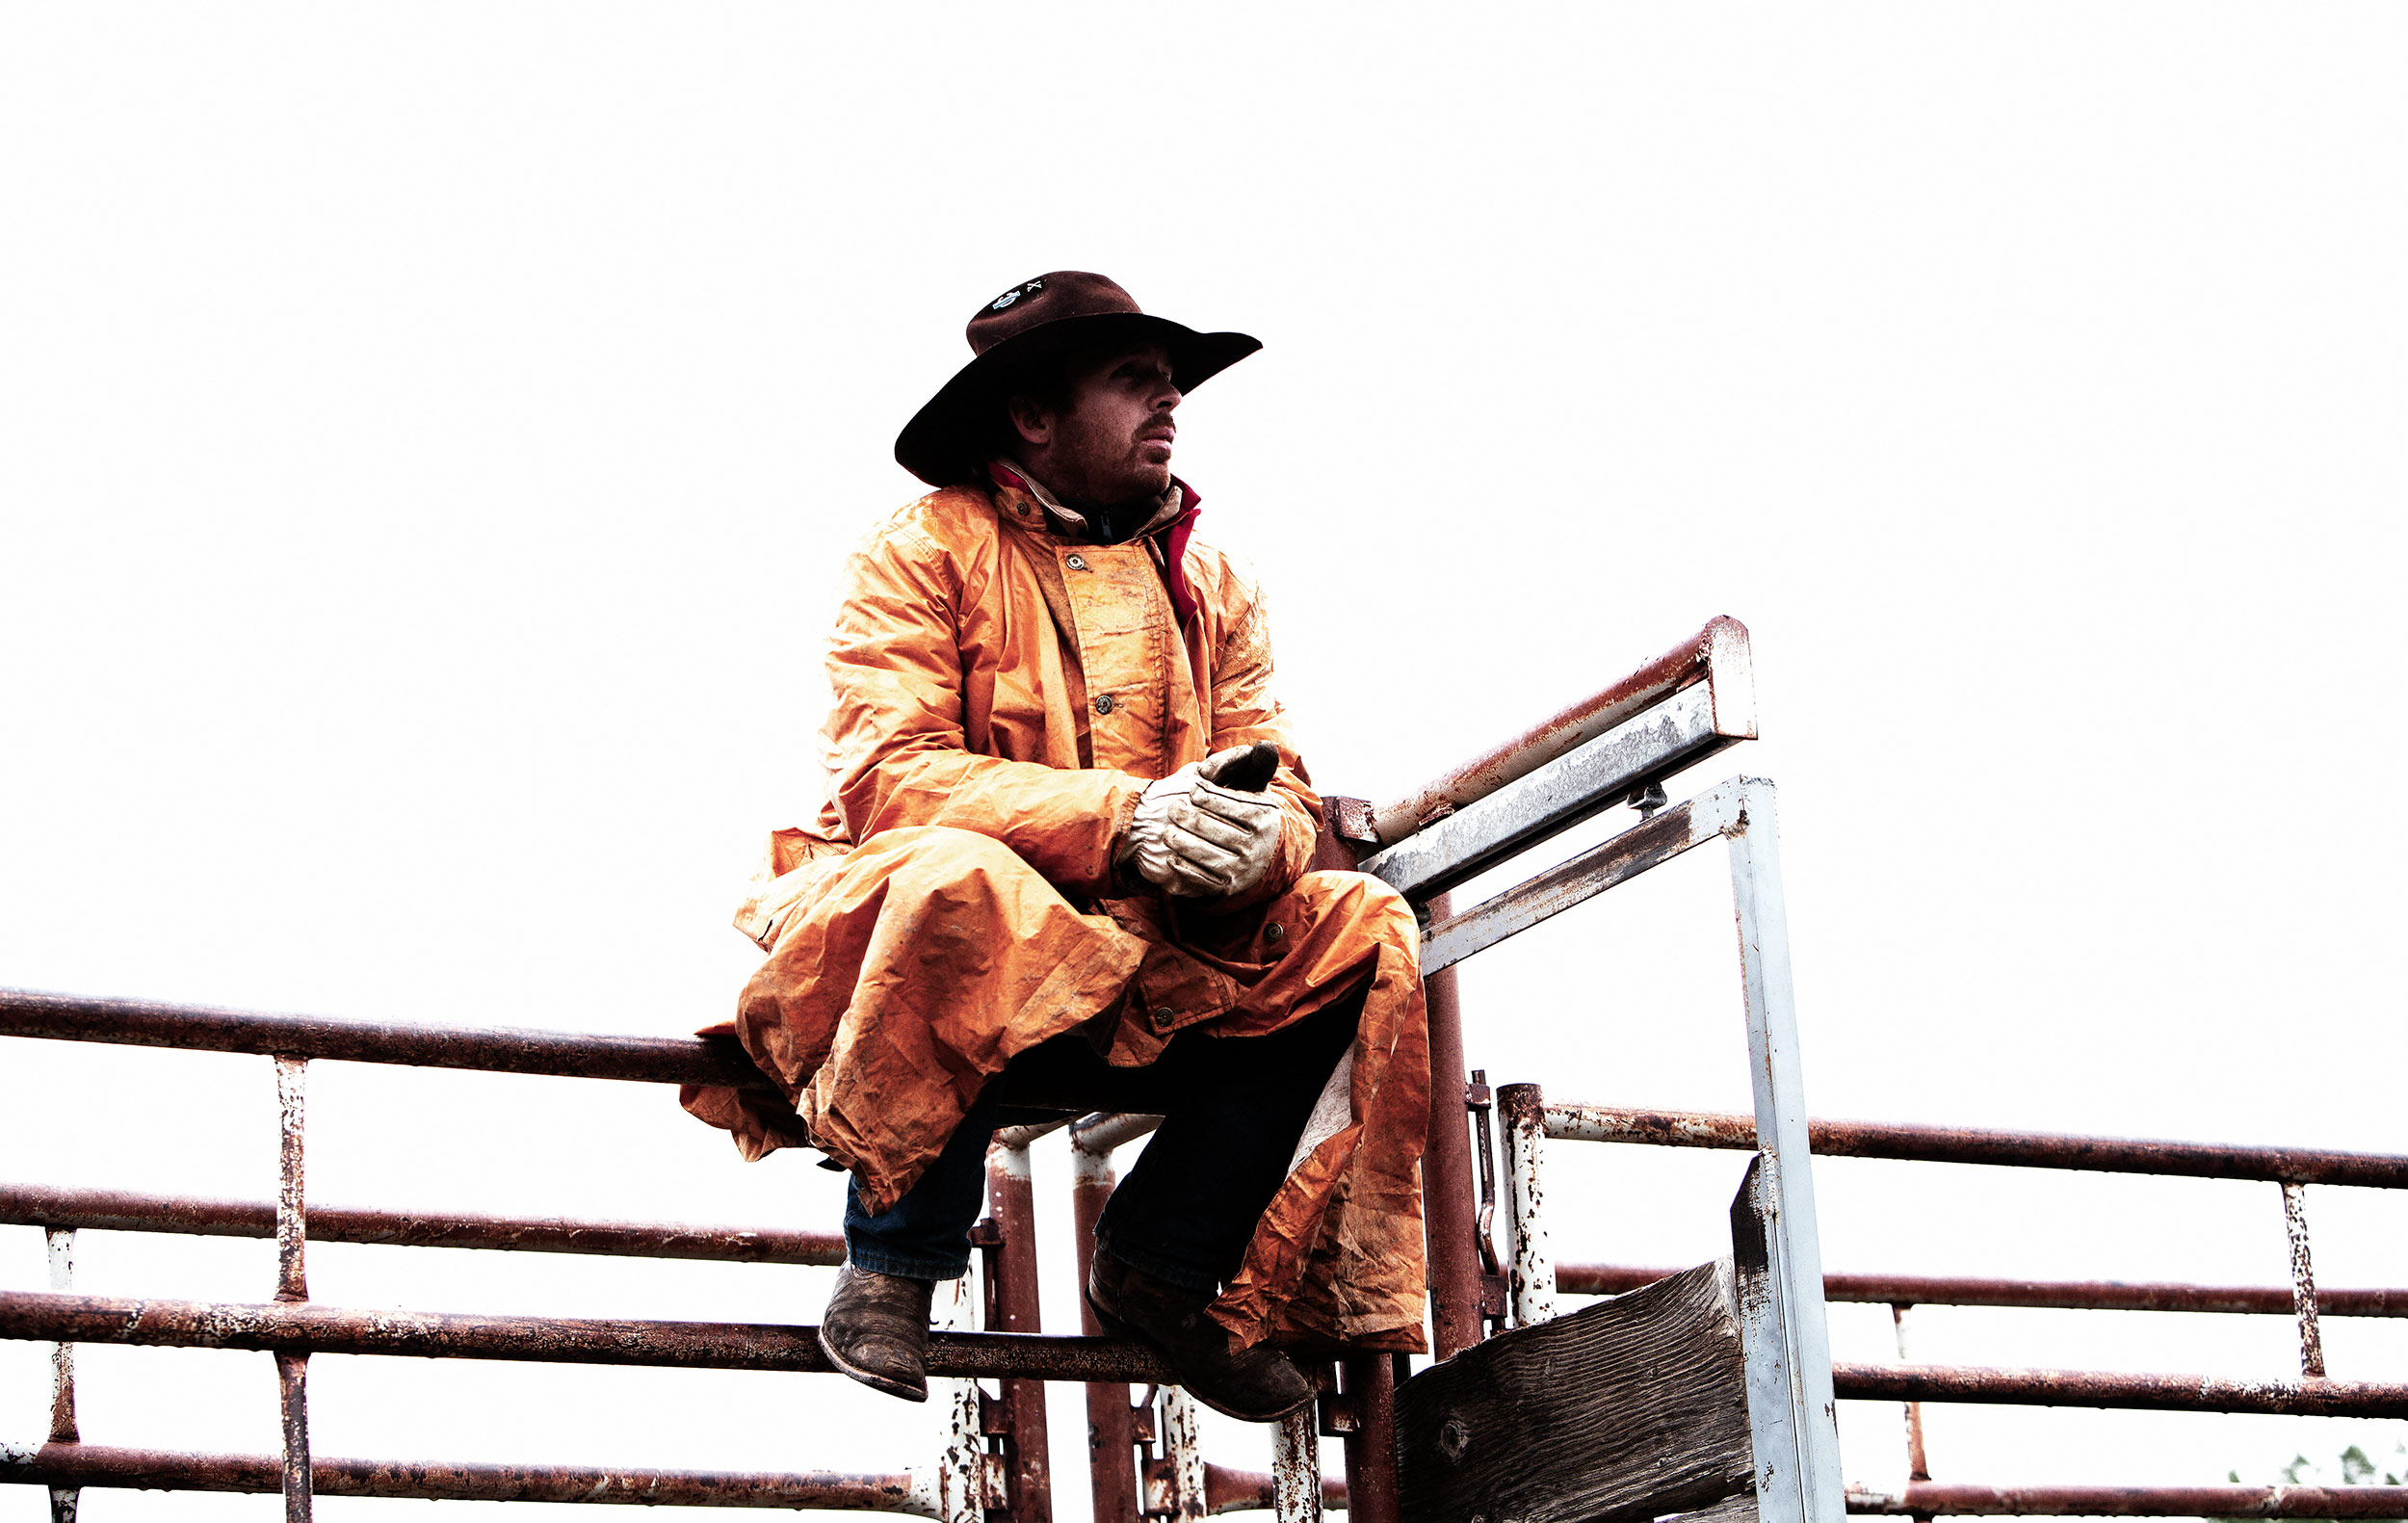 Cowboy wearing a yellow rain slicker while sitting on a metal corral at a rodeo